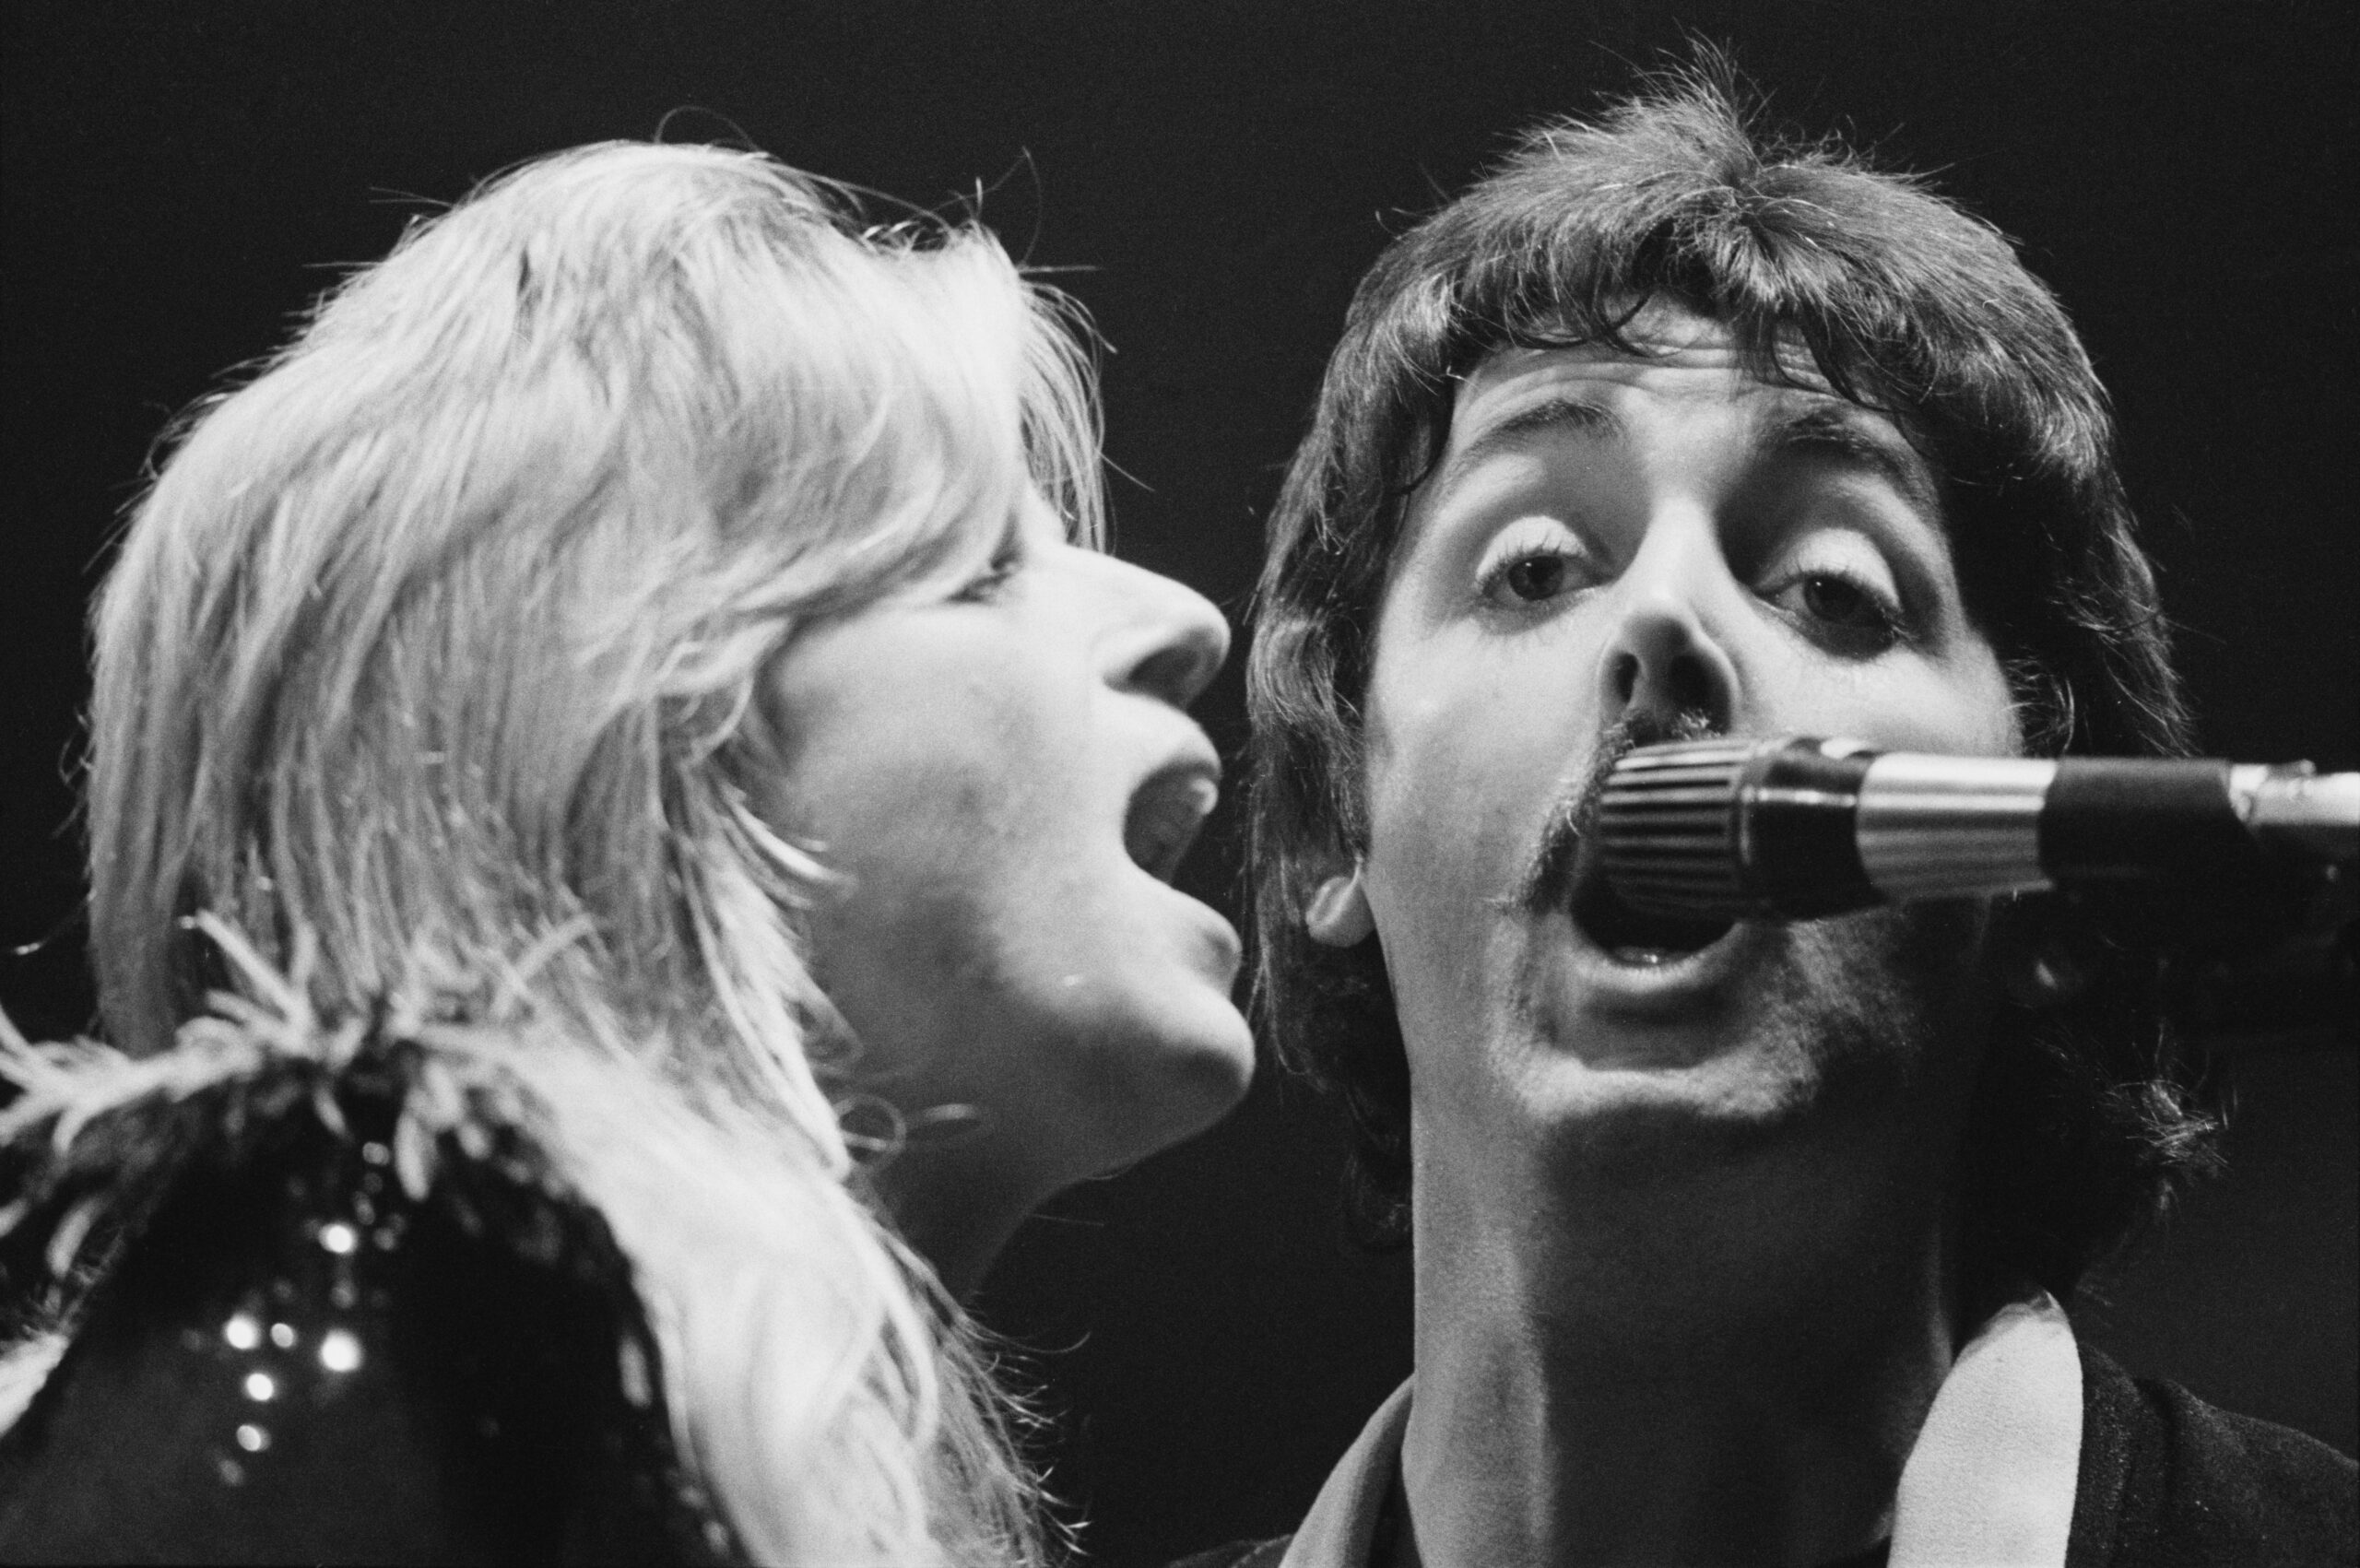 Paul and Linda McCartney performing with Wings in London in 1976 (photo: Wood / Evening Standard / Getty Images / Hulton Archive).